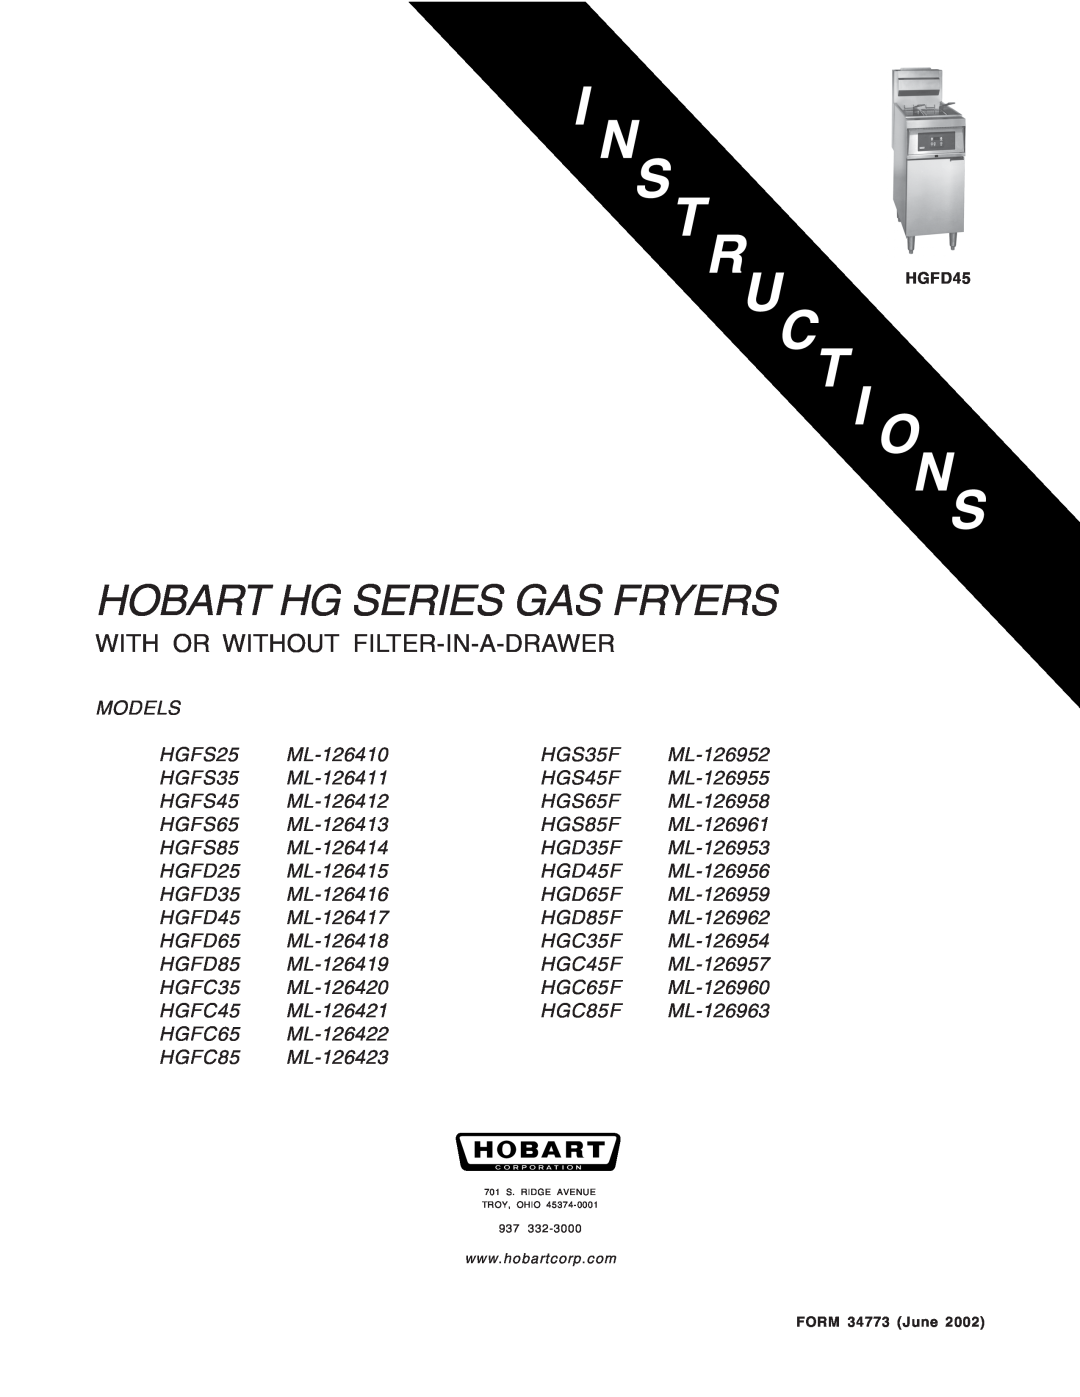 Hobart HGS85F ML-126961, HGS65F ML-126958, HGF manual Hobart Hg Series Gas Fryers, With Or Without Filter-In-A-Drawer 